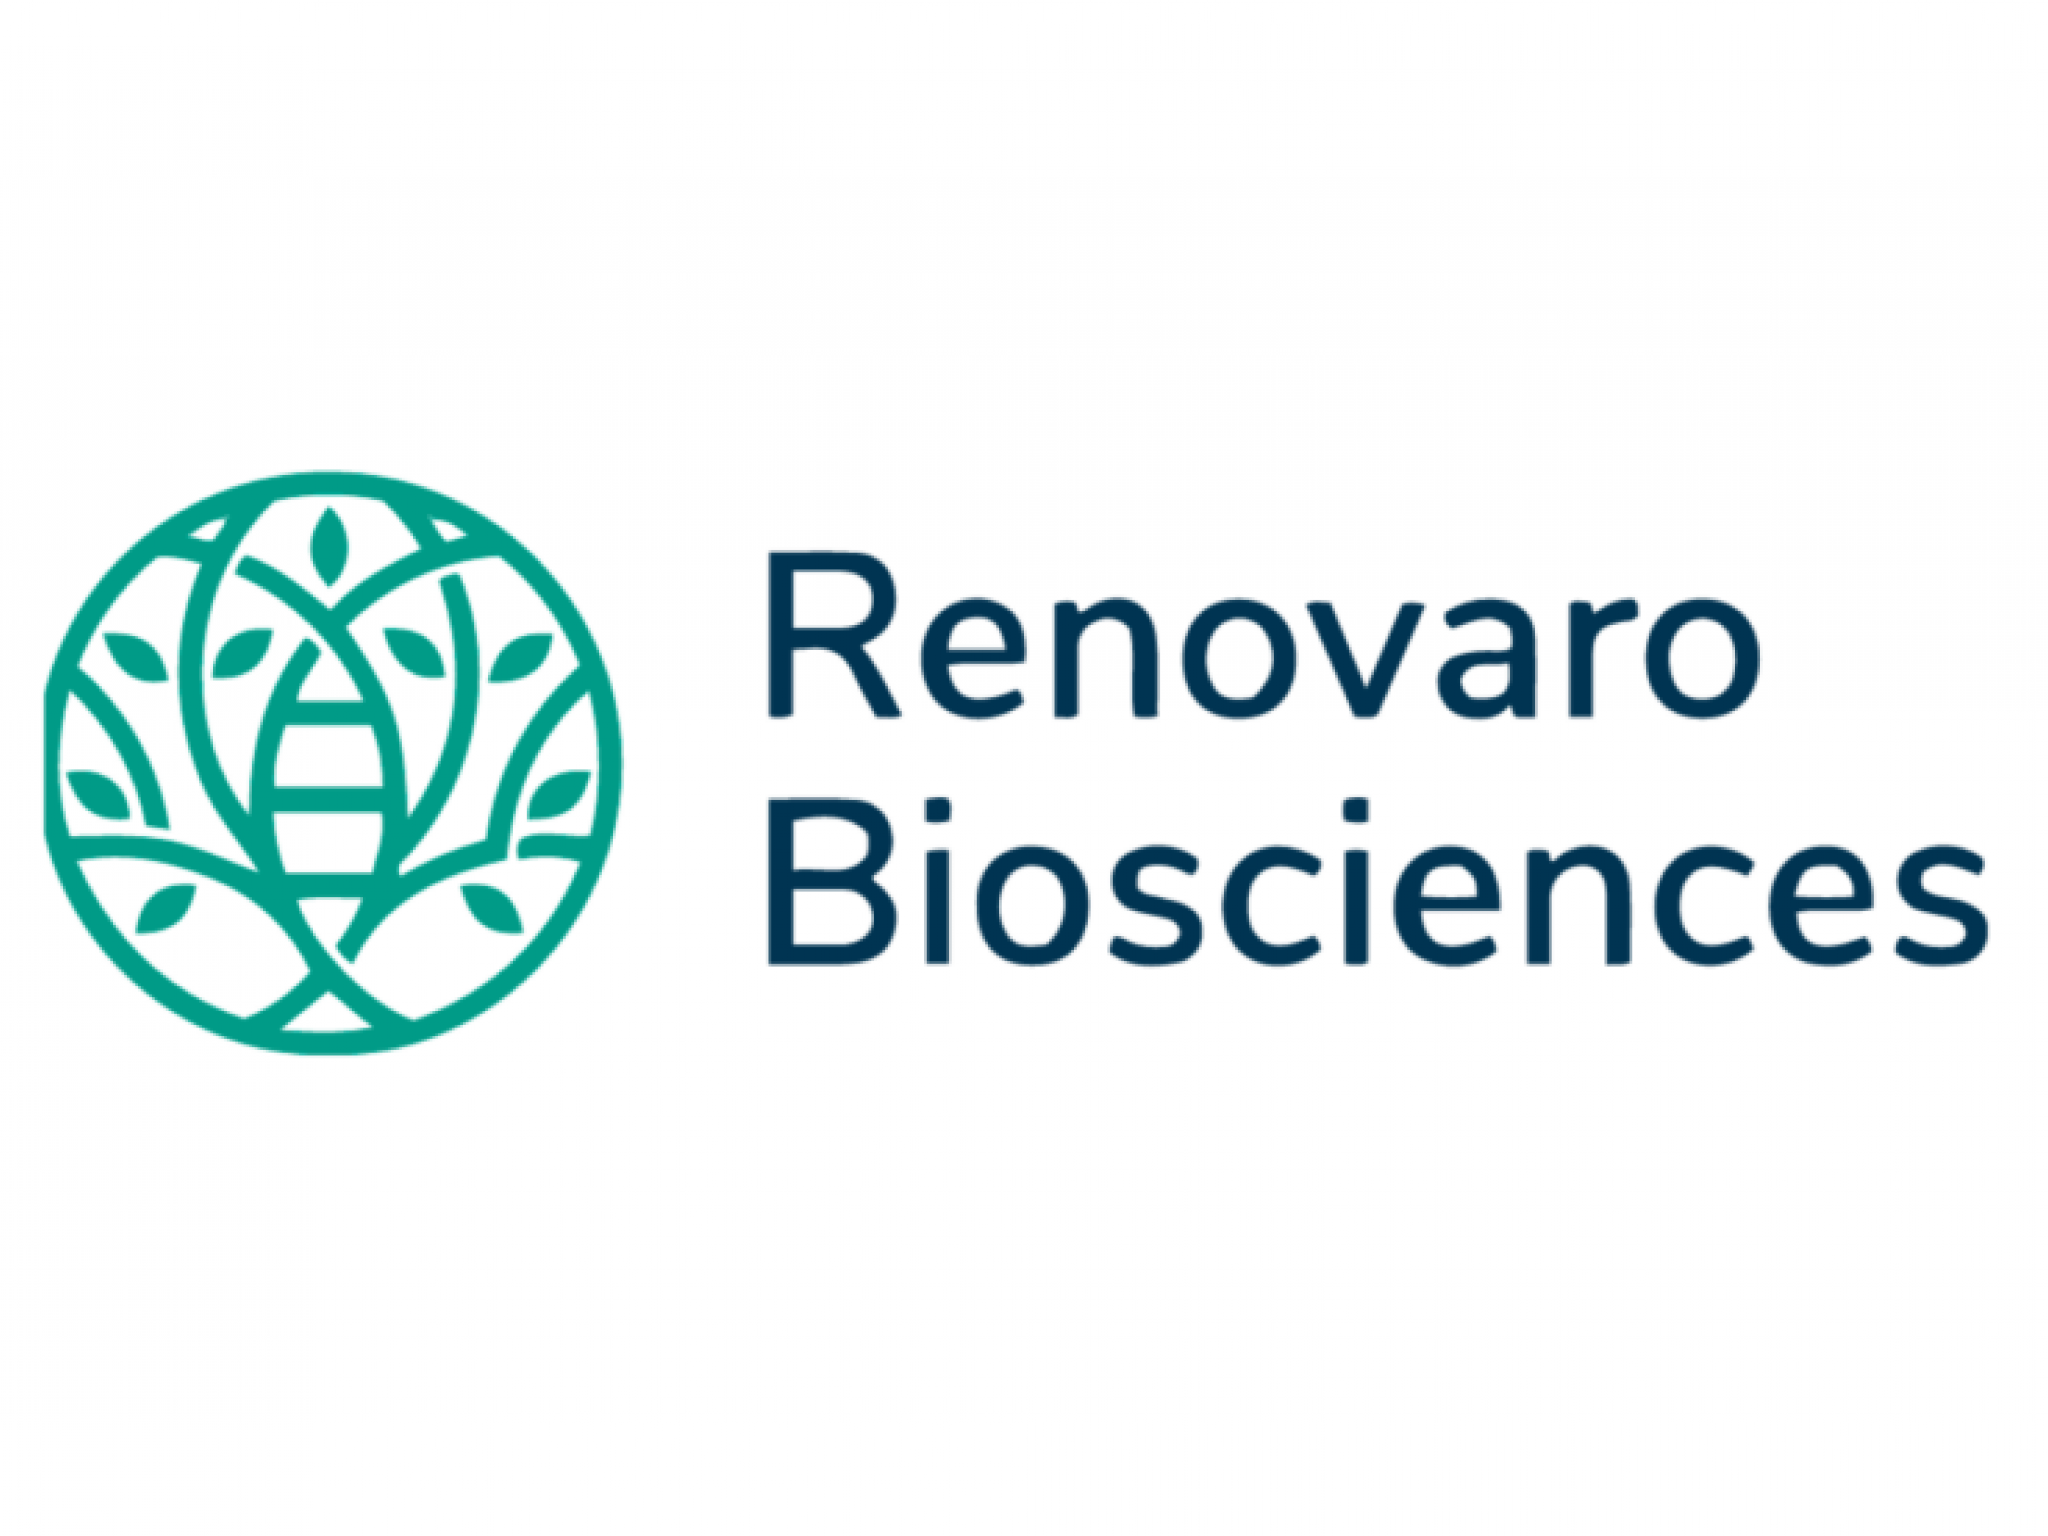  hit-with-short-seller-report-renovaro-biosciences-comments-on-hindenburgs-opinion-piece 